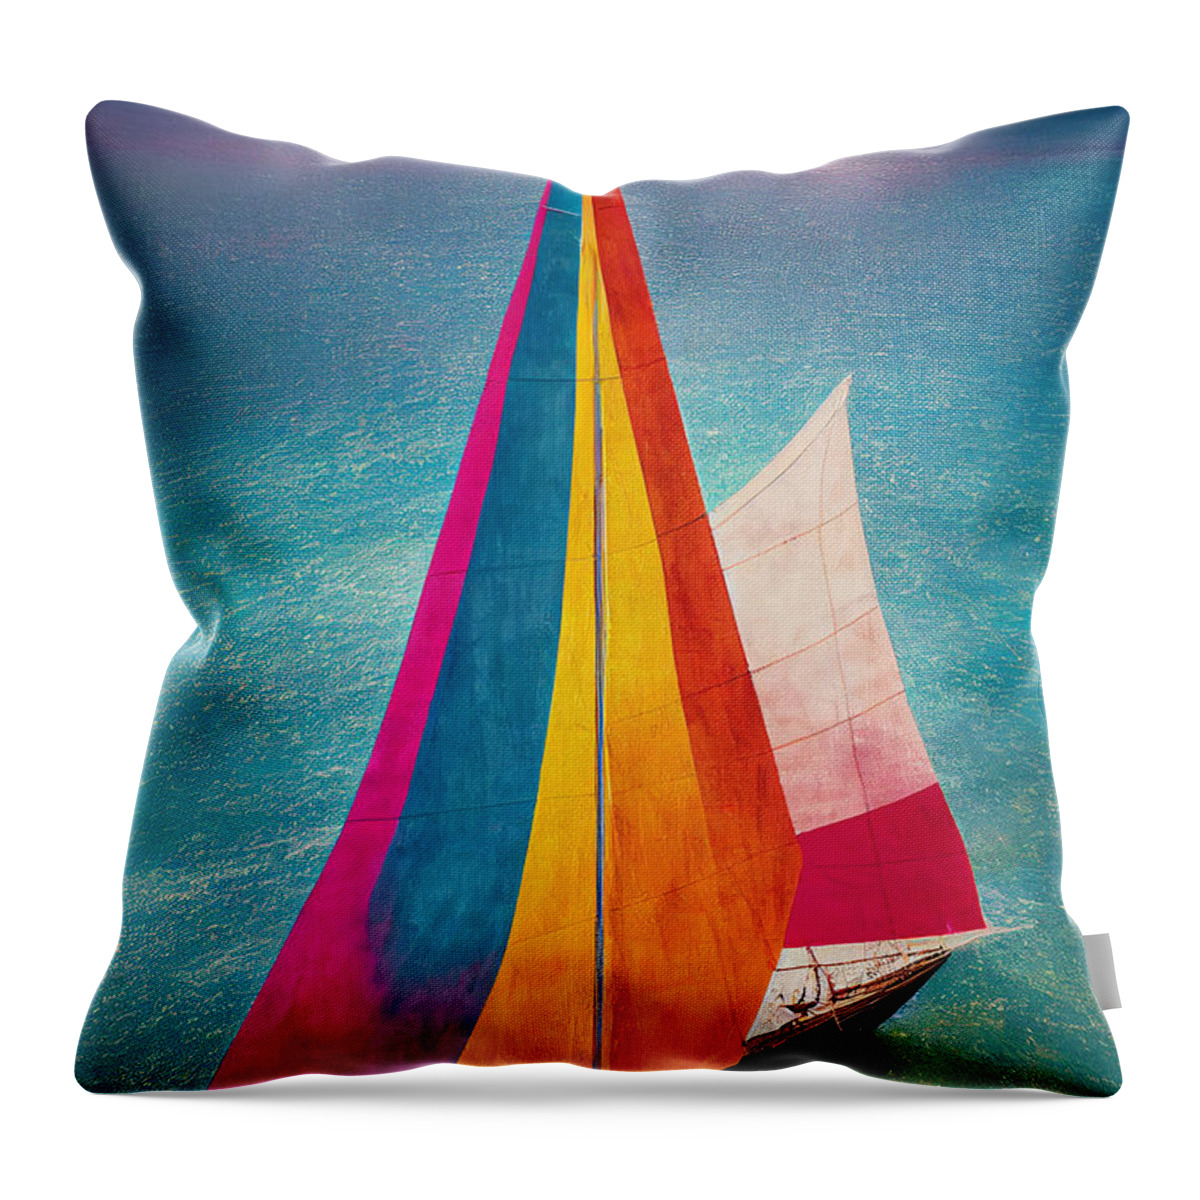 Colorful Portrait Of Gandhi Décor Throw Pillow featuring the painting Colorful portrait of Gandhi on a sail boat in the bah 5645563aa645563df6 9ab5 645250 a by Celestial Images